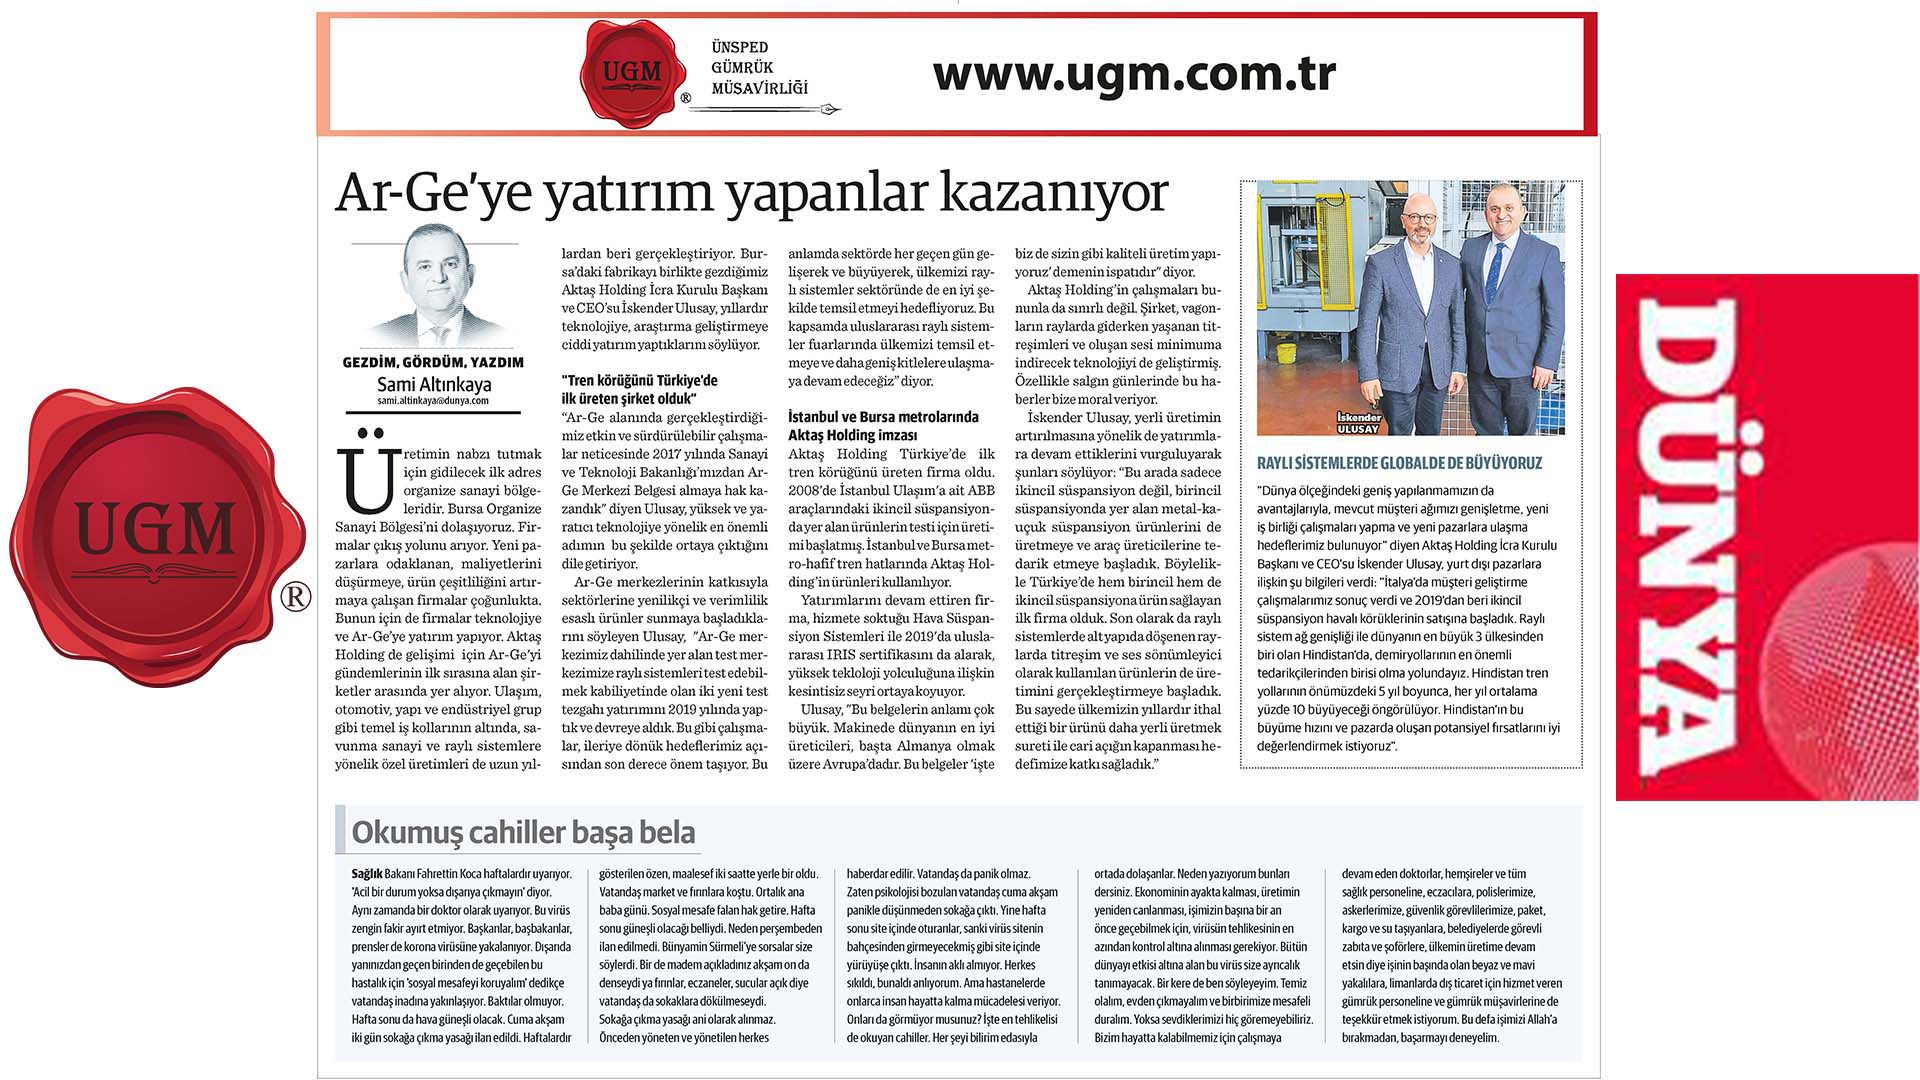 Our UGM Corporate Communications Director Mr. Sami Altınkaya's article titled "Those who invest in R&D are winning" was published in Dünya Newspaper on 13.04.2020.